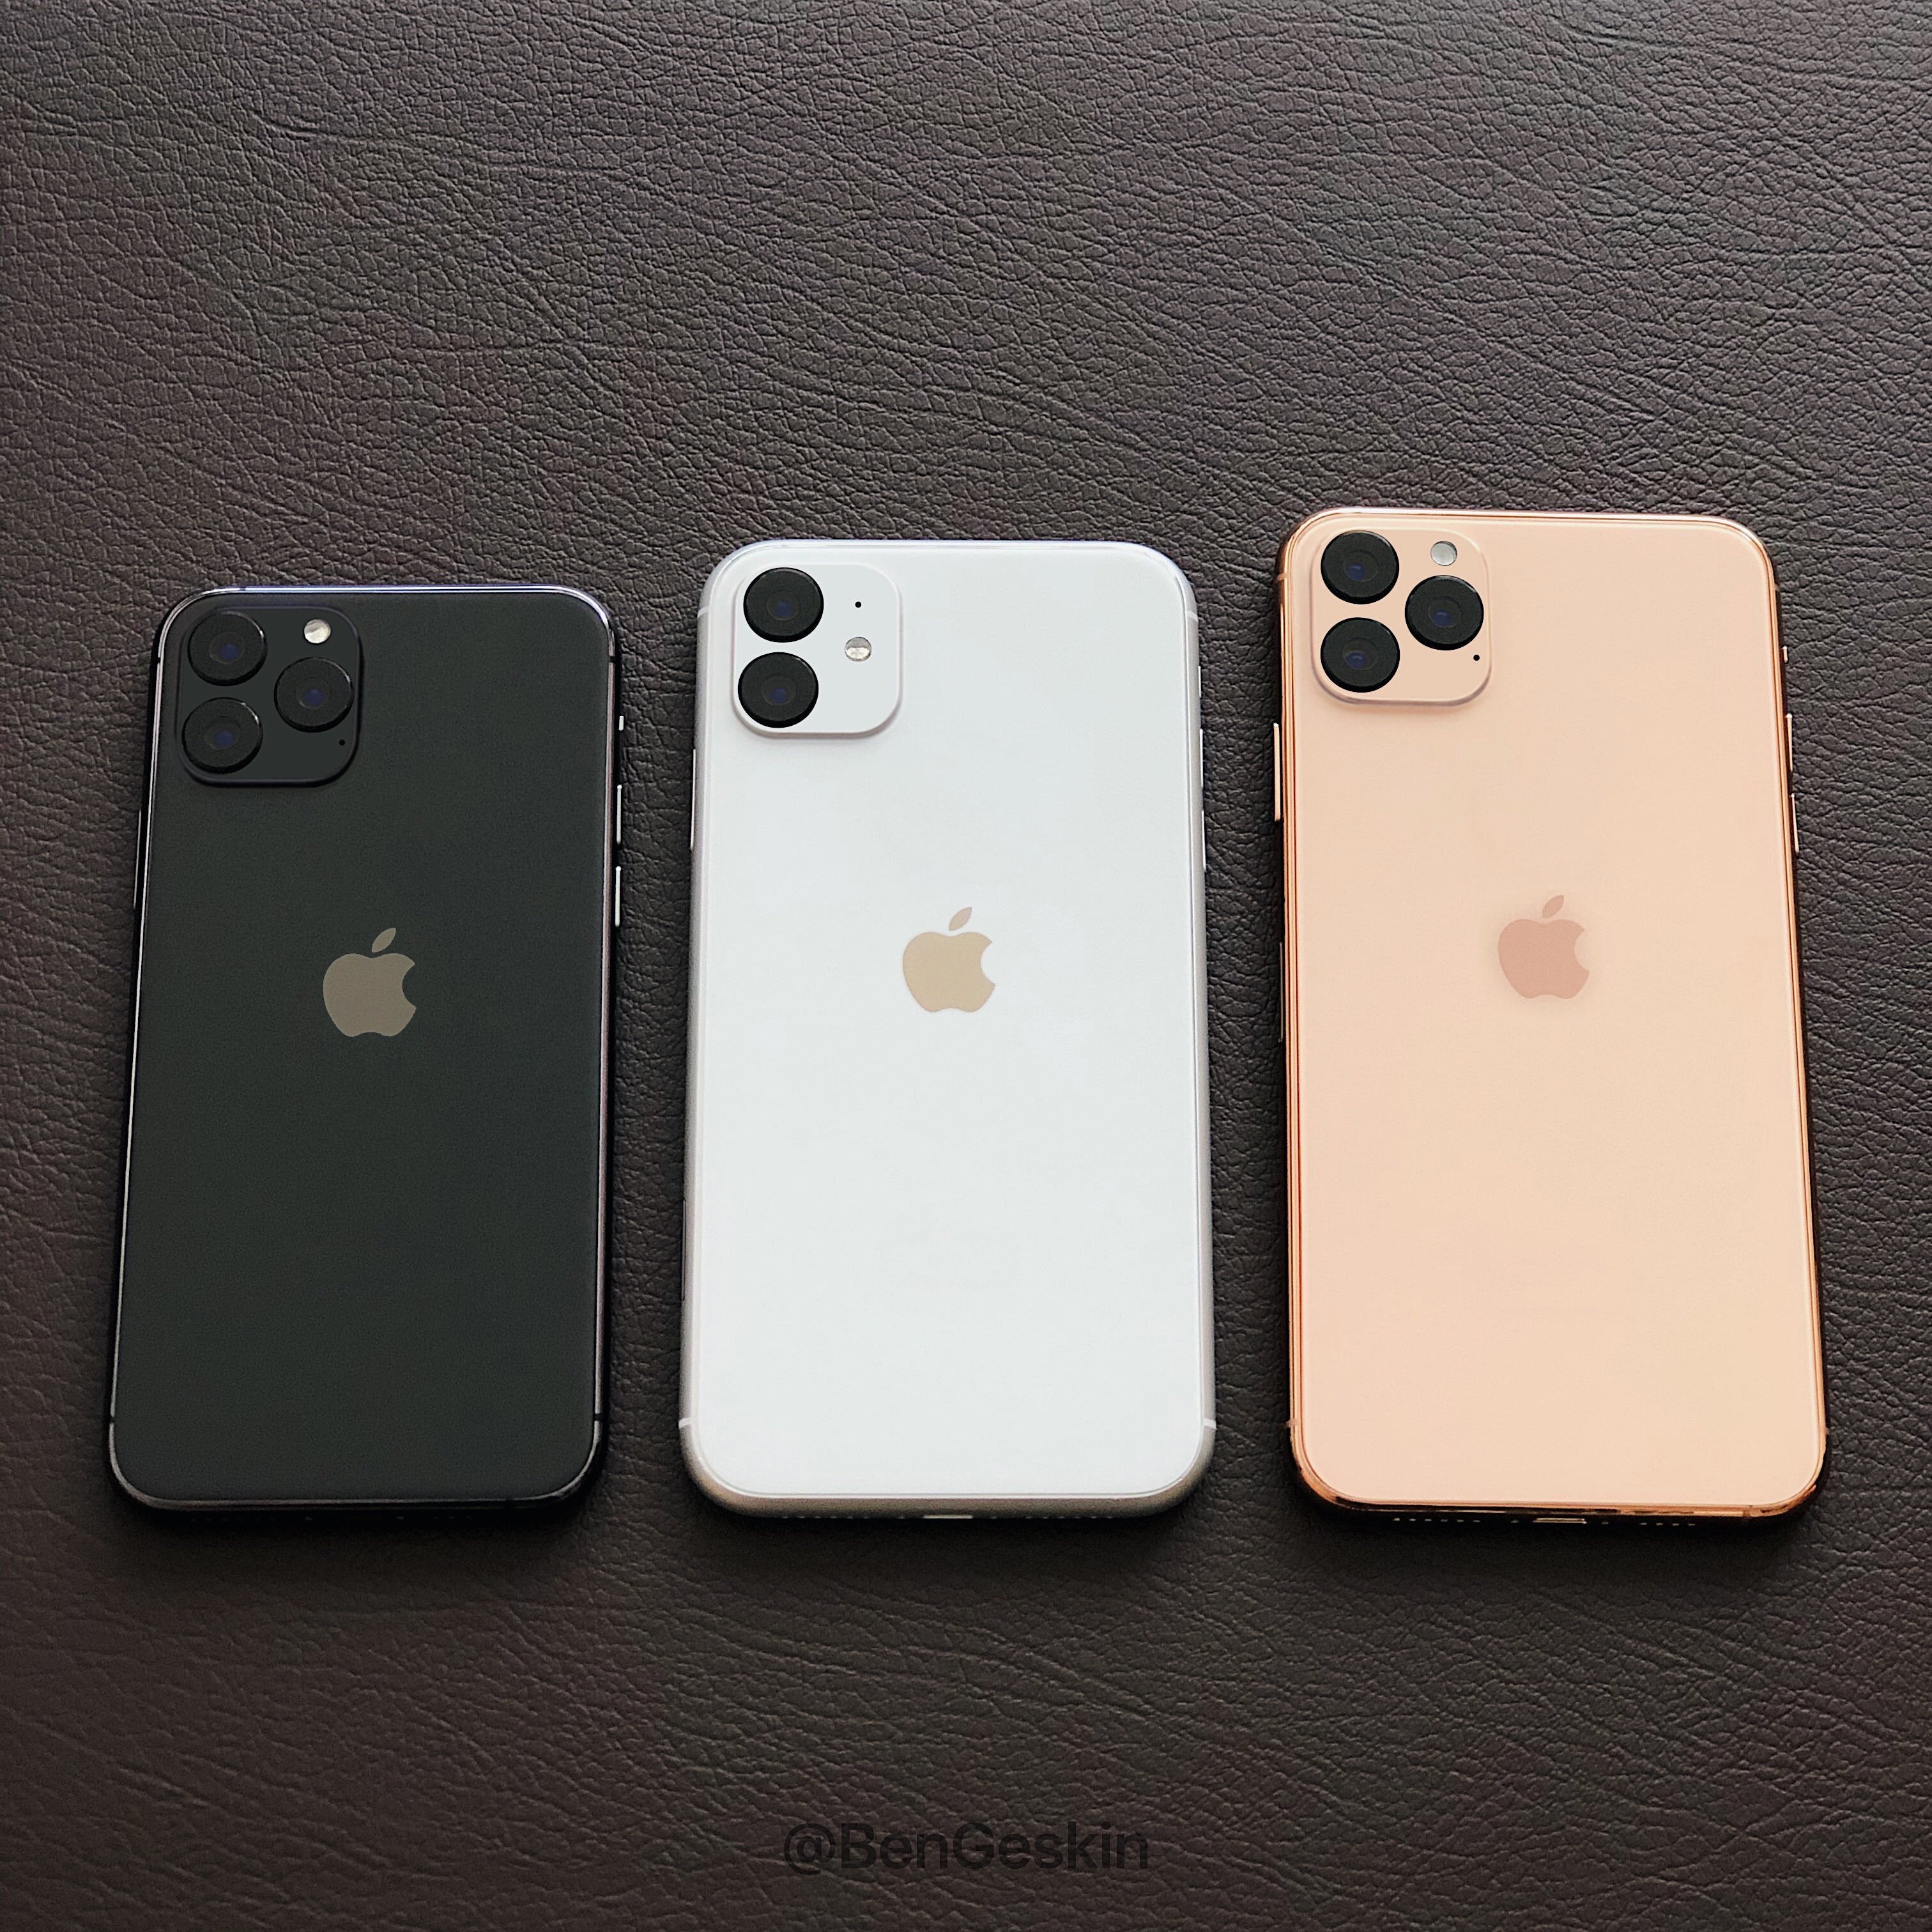 Mockups of the 2019 Apple iPhone line with centered Apple logo on the back - New camera module forces Apple to make a change to the new iPhones that everyone will notice